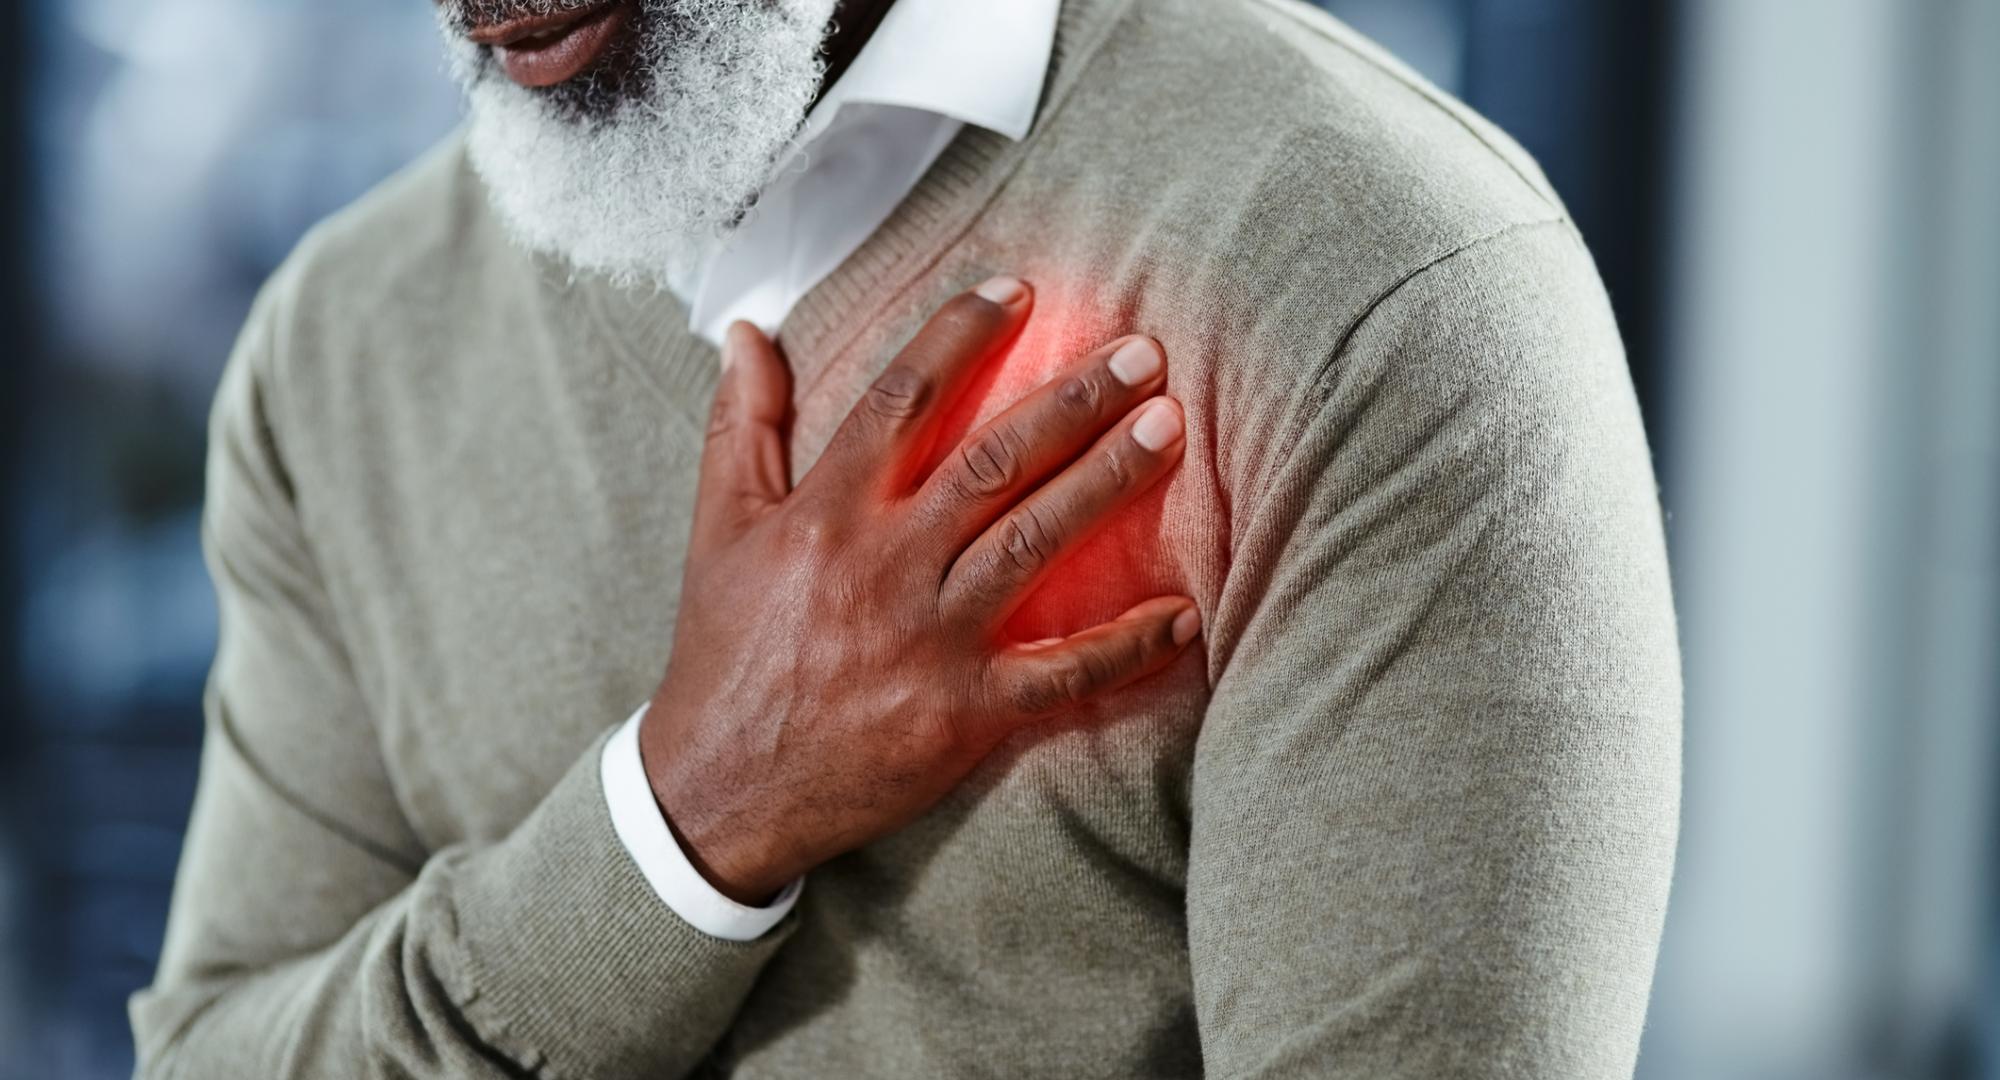 Chest pain in an adult male